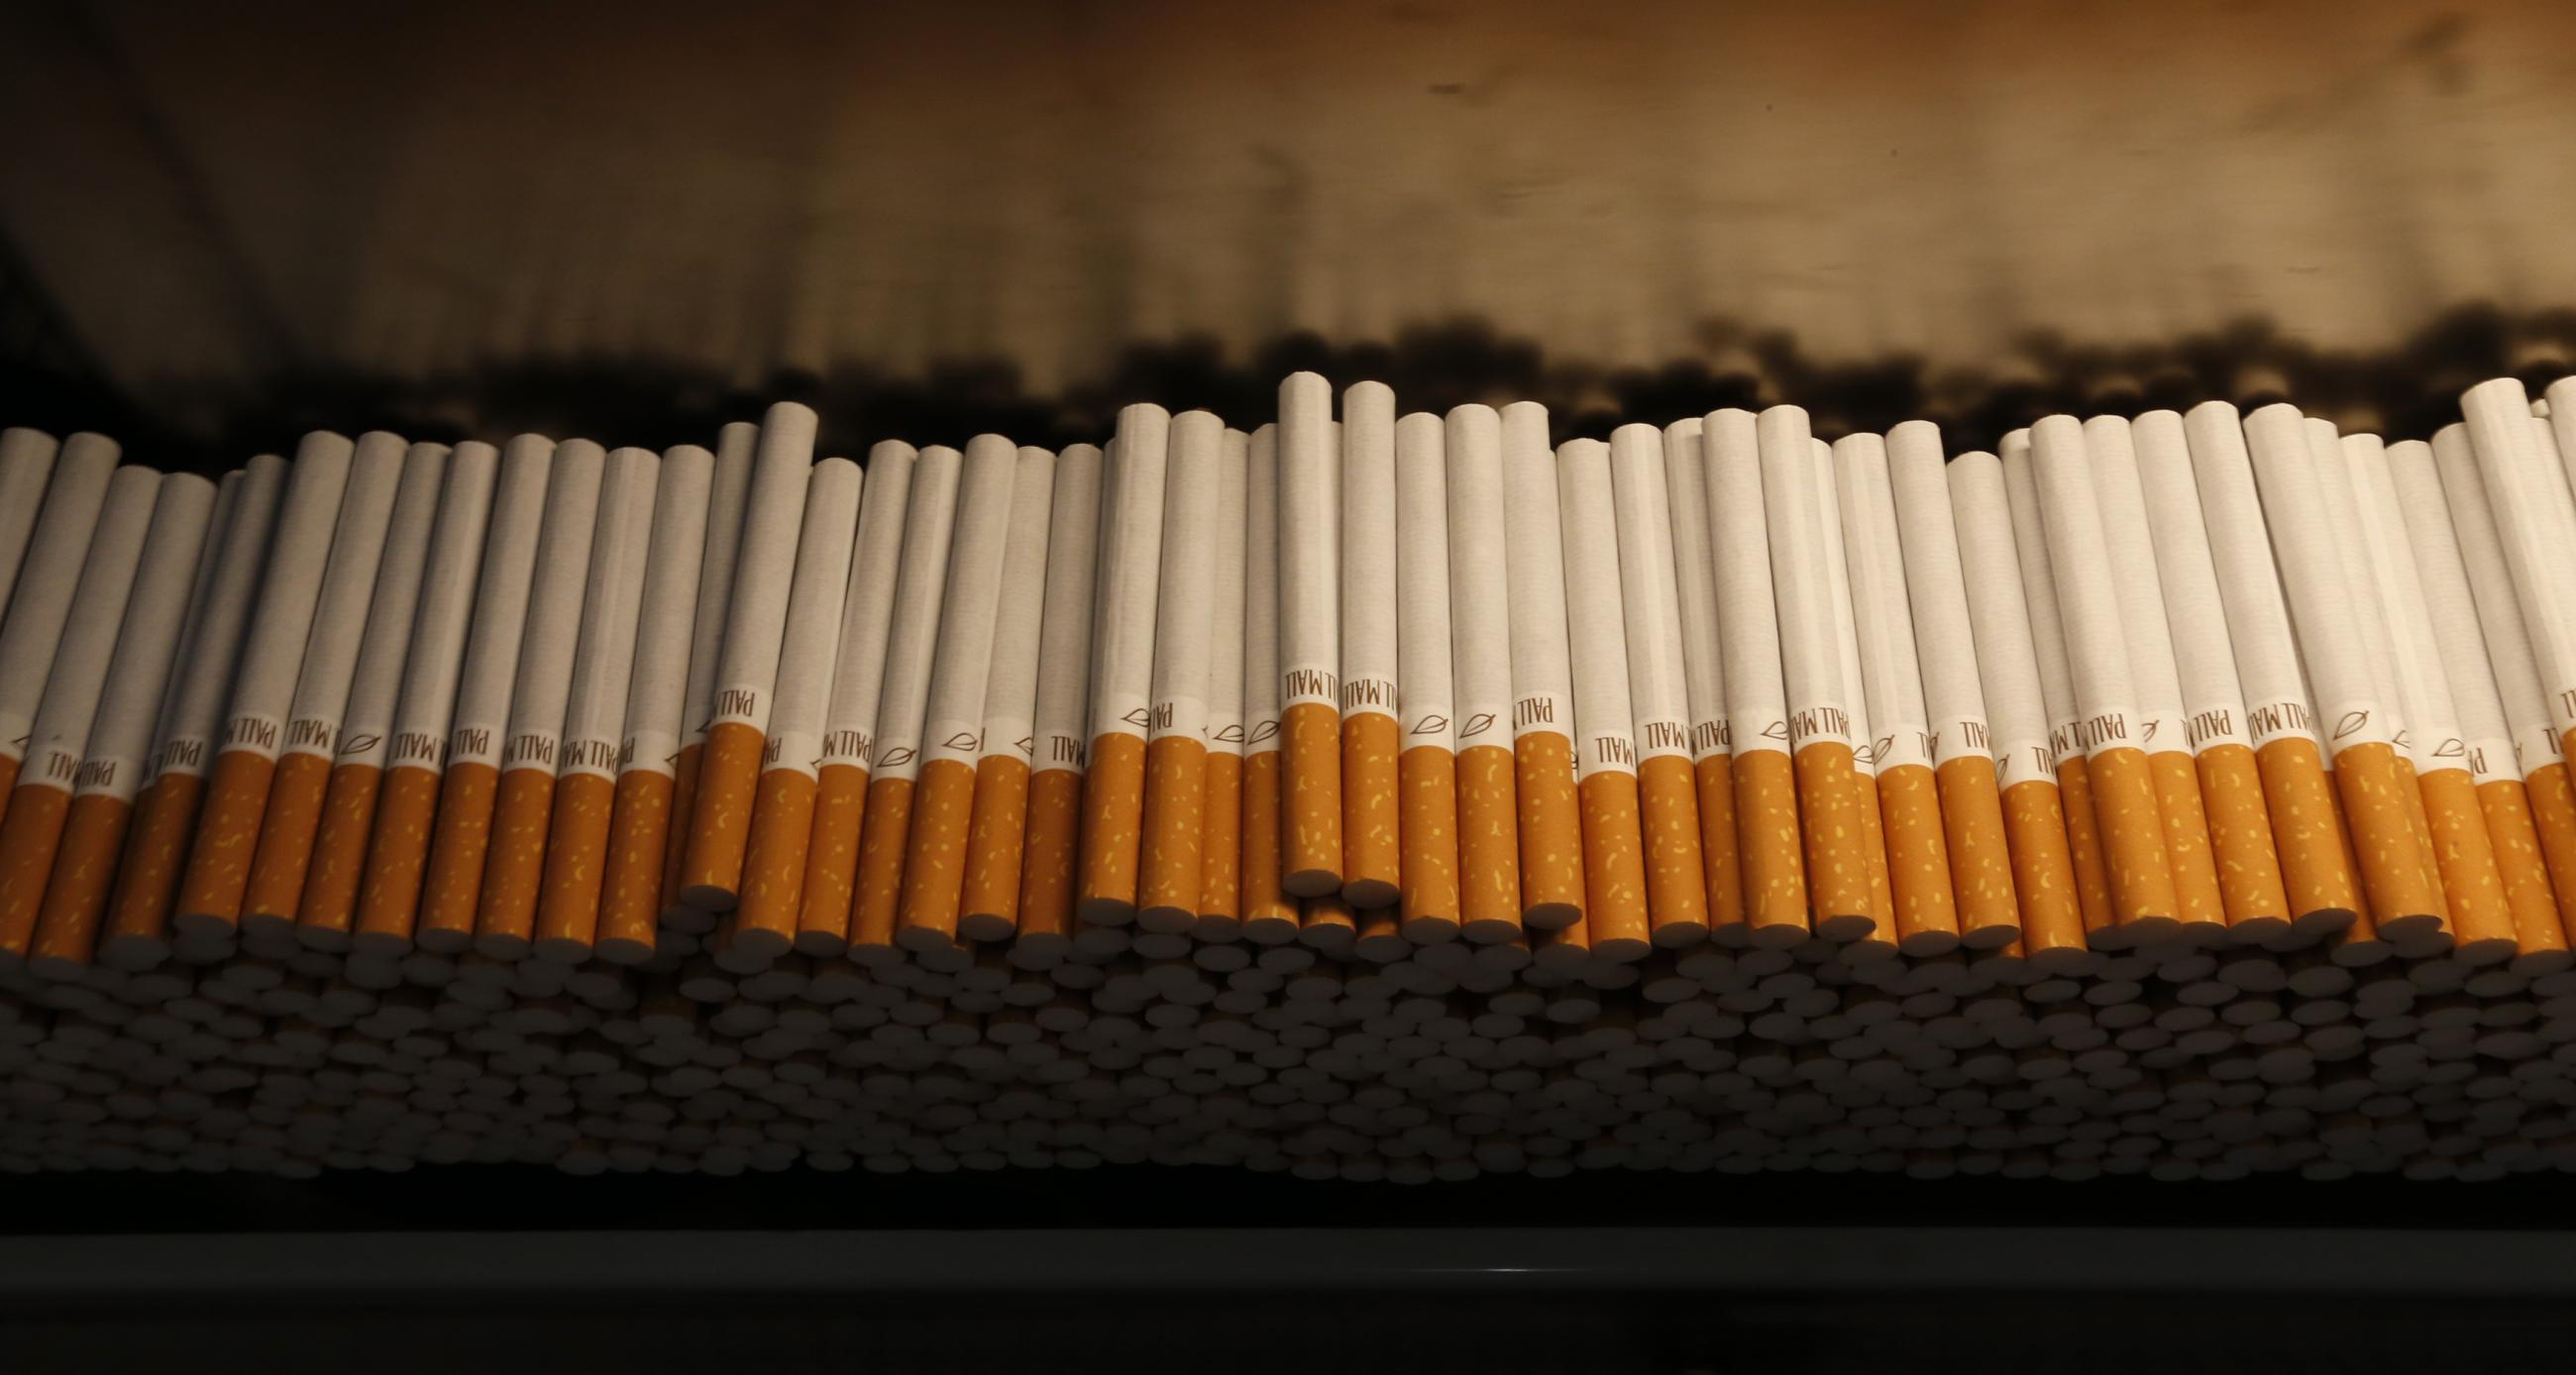 Cigarettes are piled during the manufacturing process in the British American Tobacco Cigarette Factory.